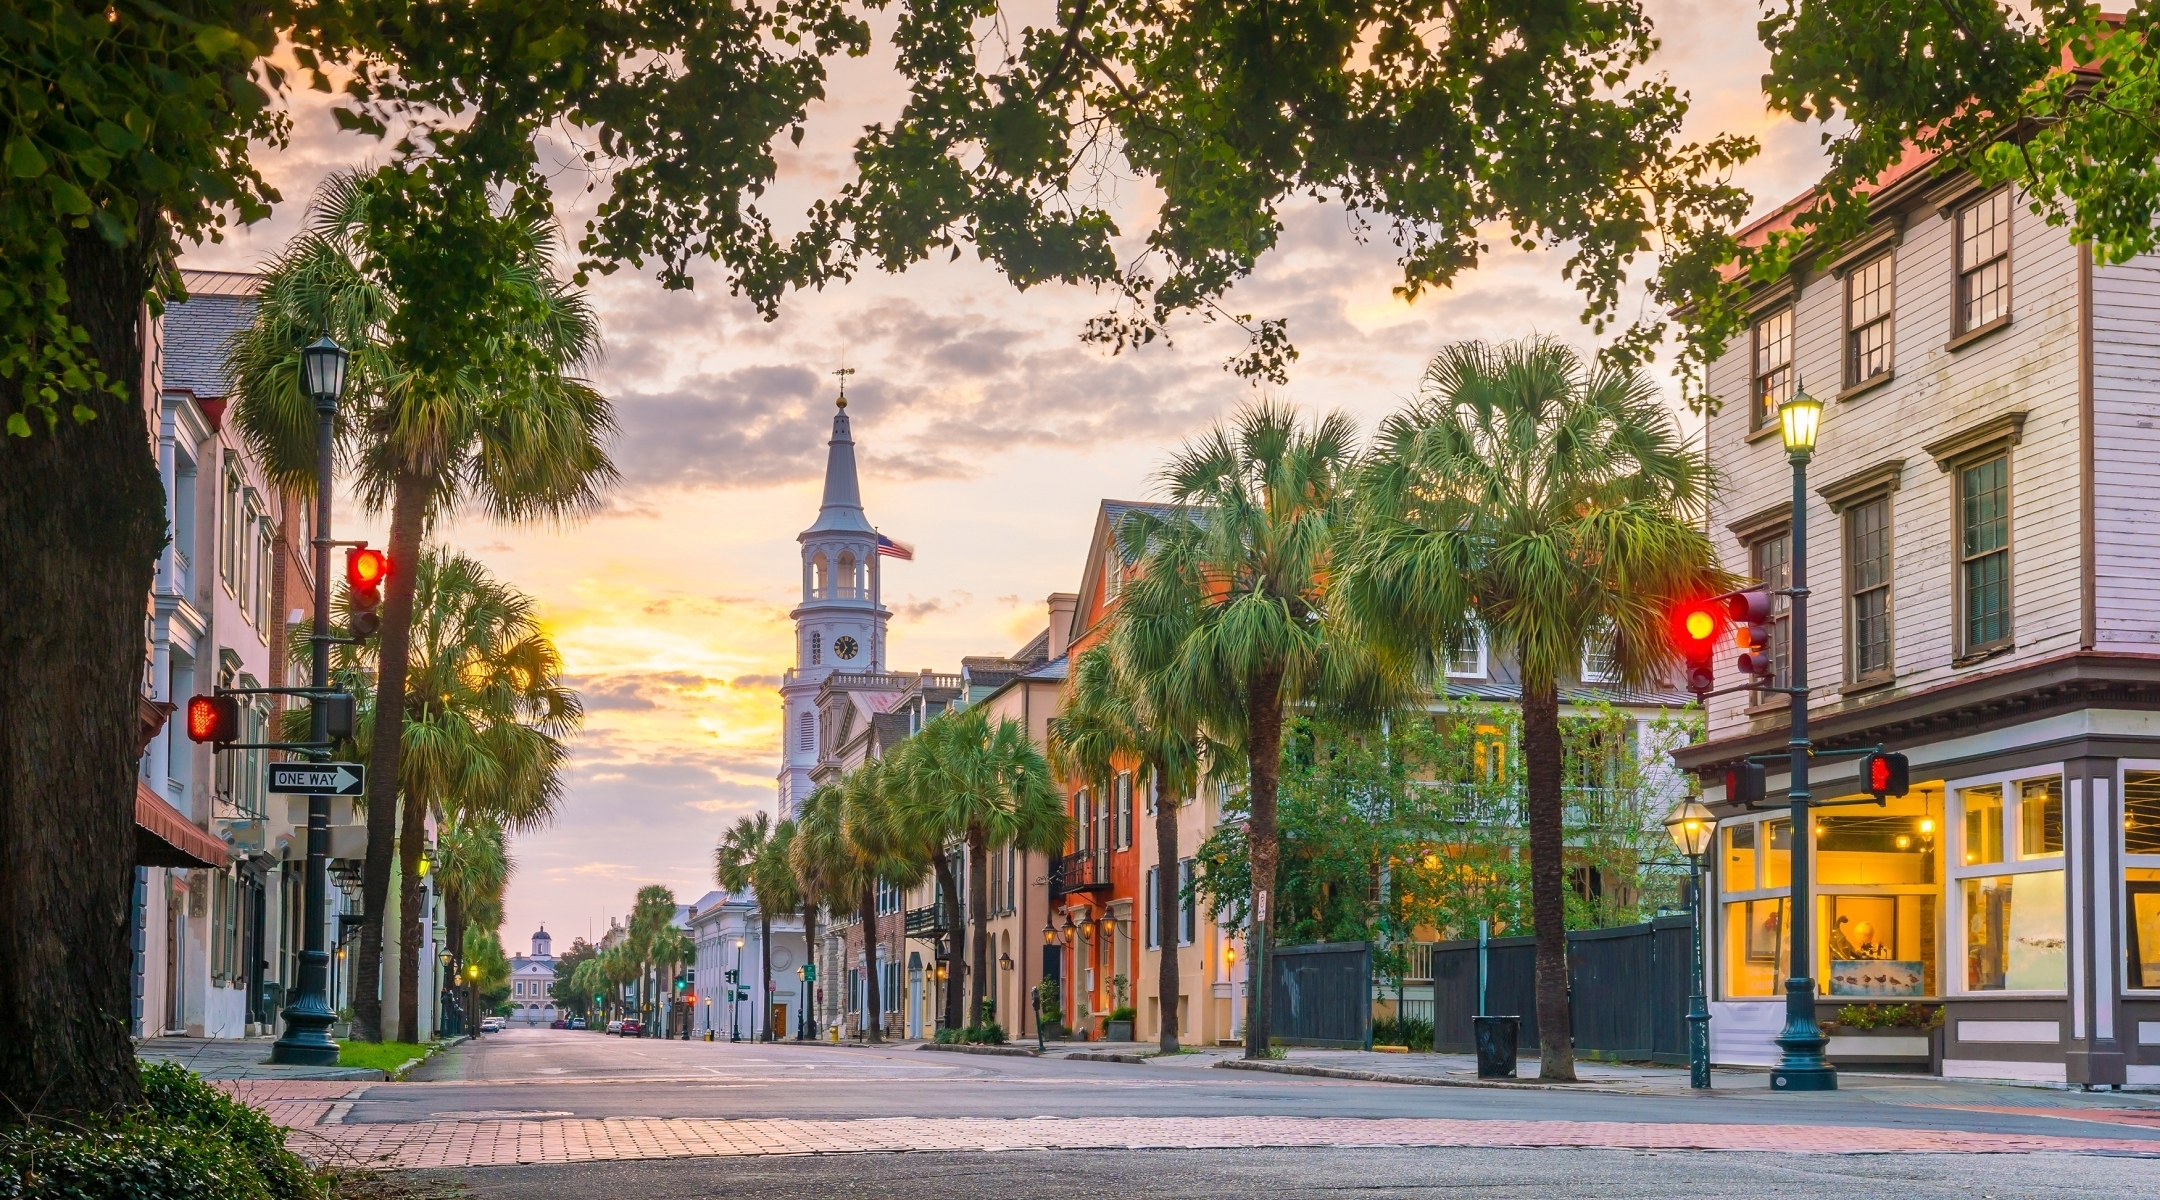 Afternoon view of a tree-lined street in South Carolina